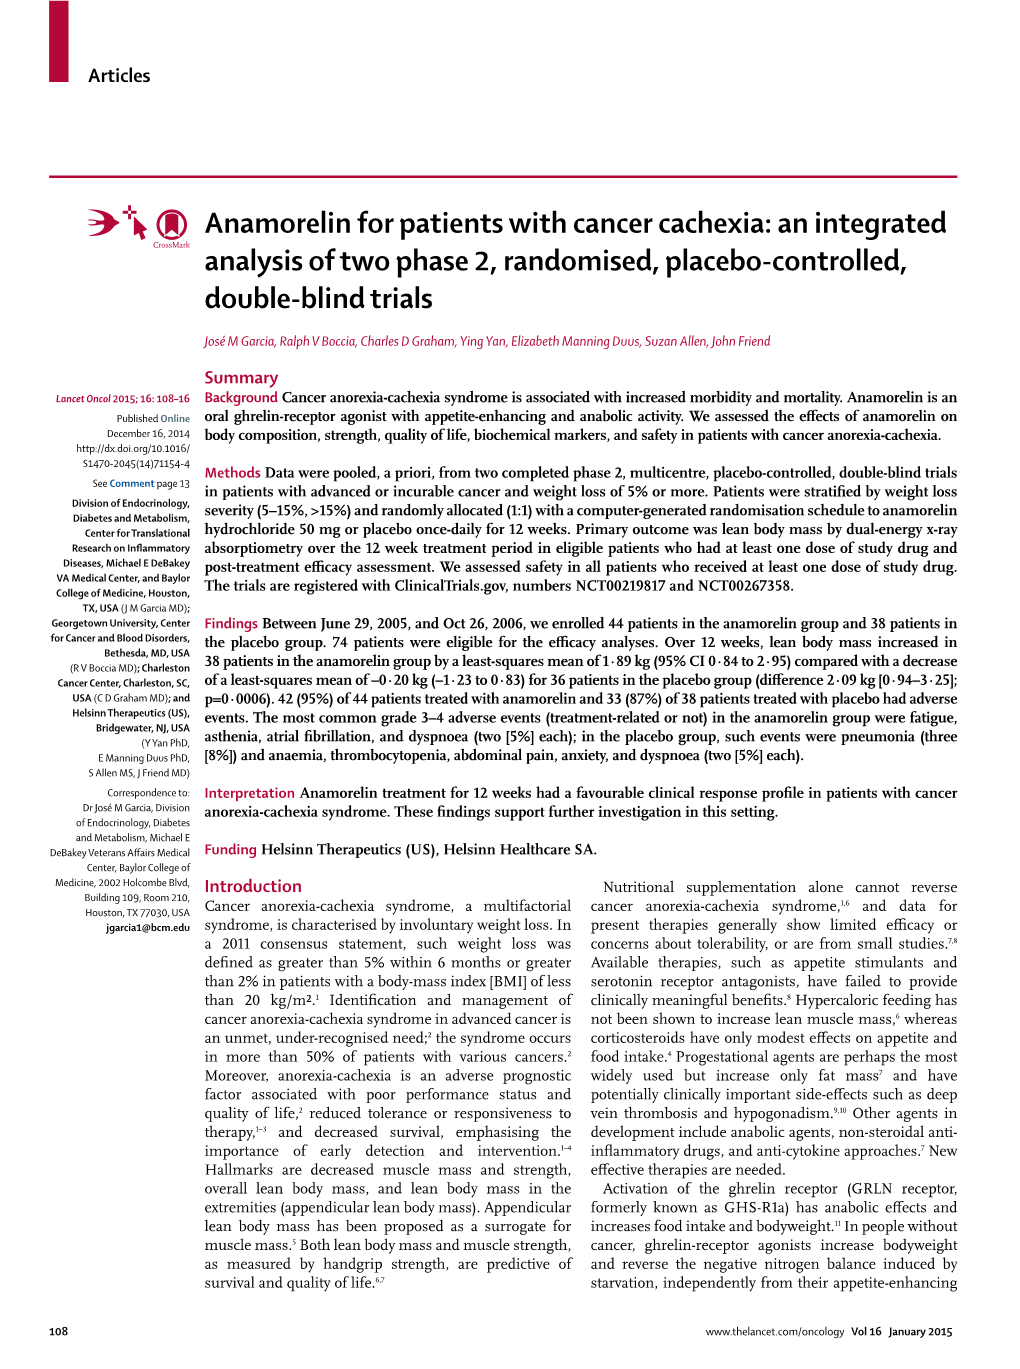 Anamorelin for Patients with Cancer Cachexia: an Integrated Analysis of Two Phase 2, Randomised, Placebo-Controlled, Double-Blind Trials